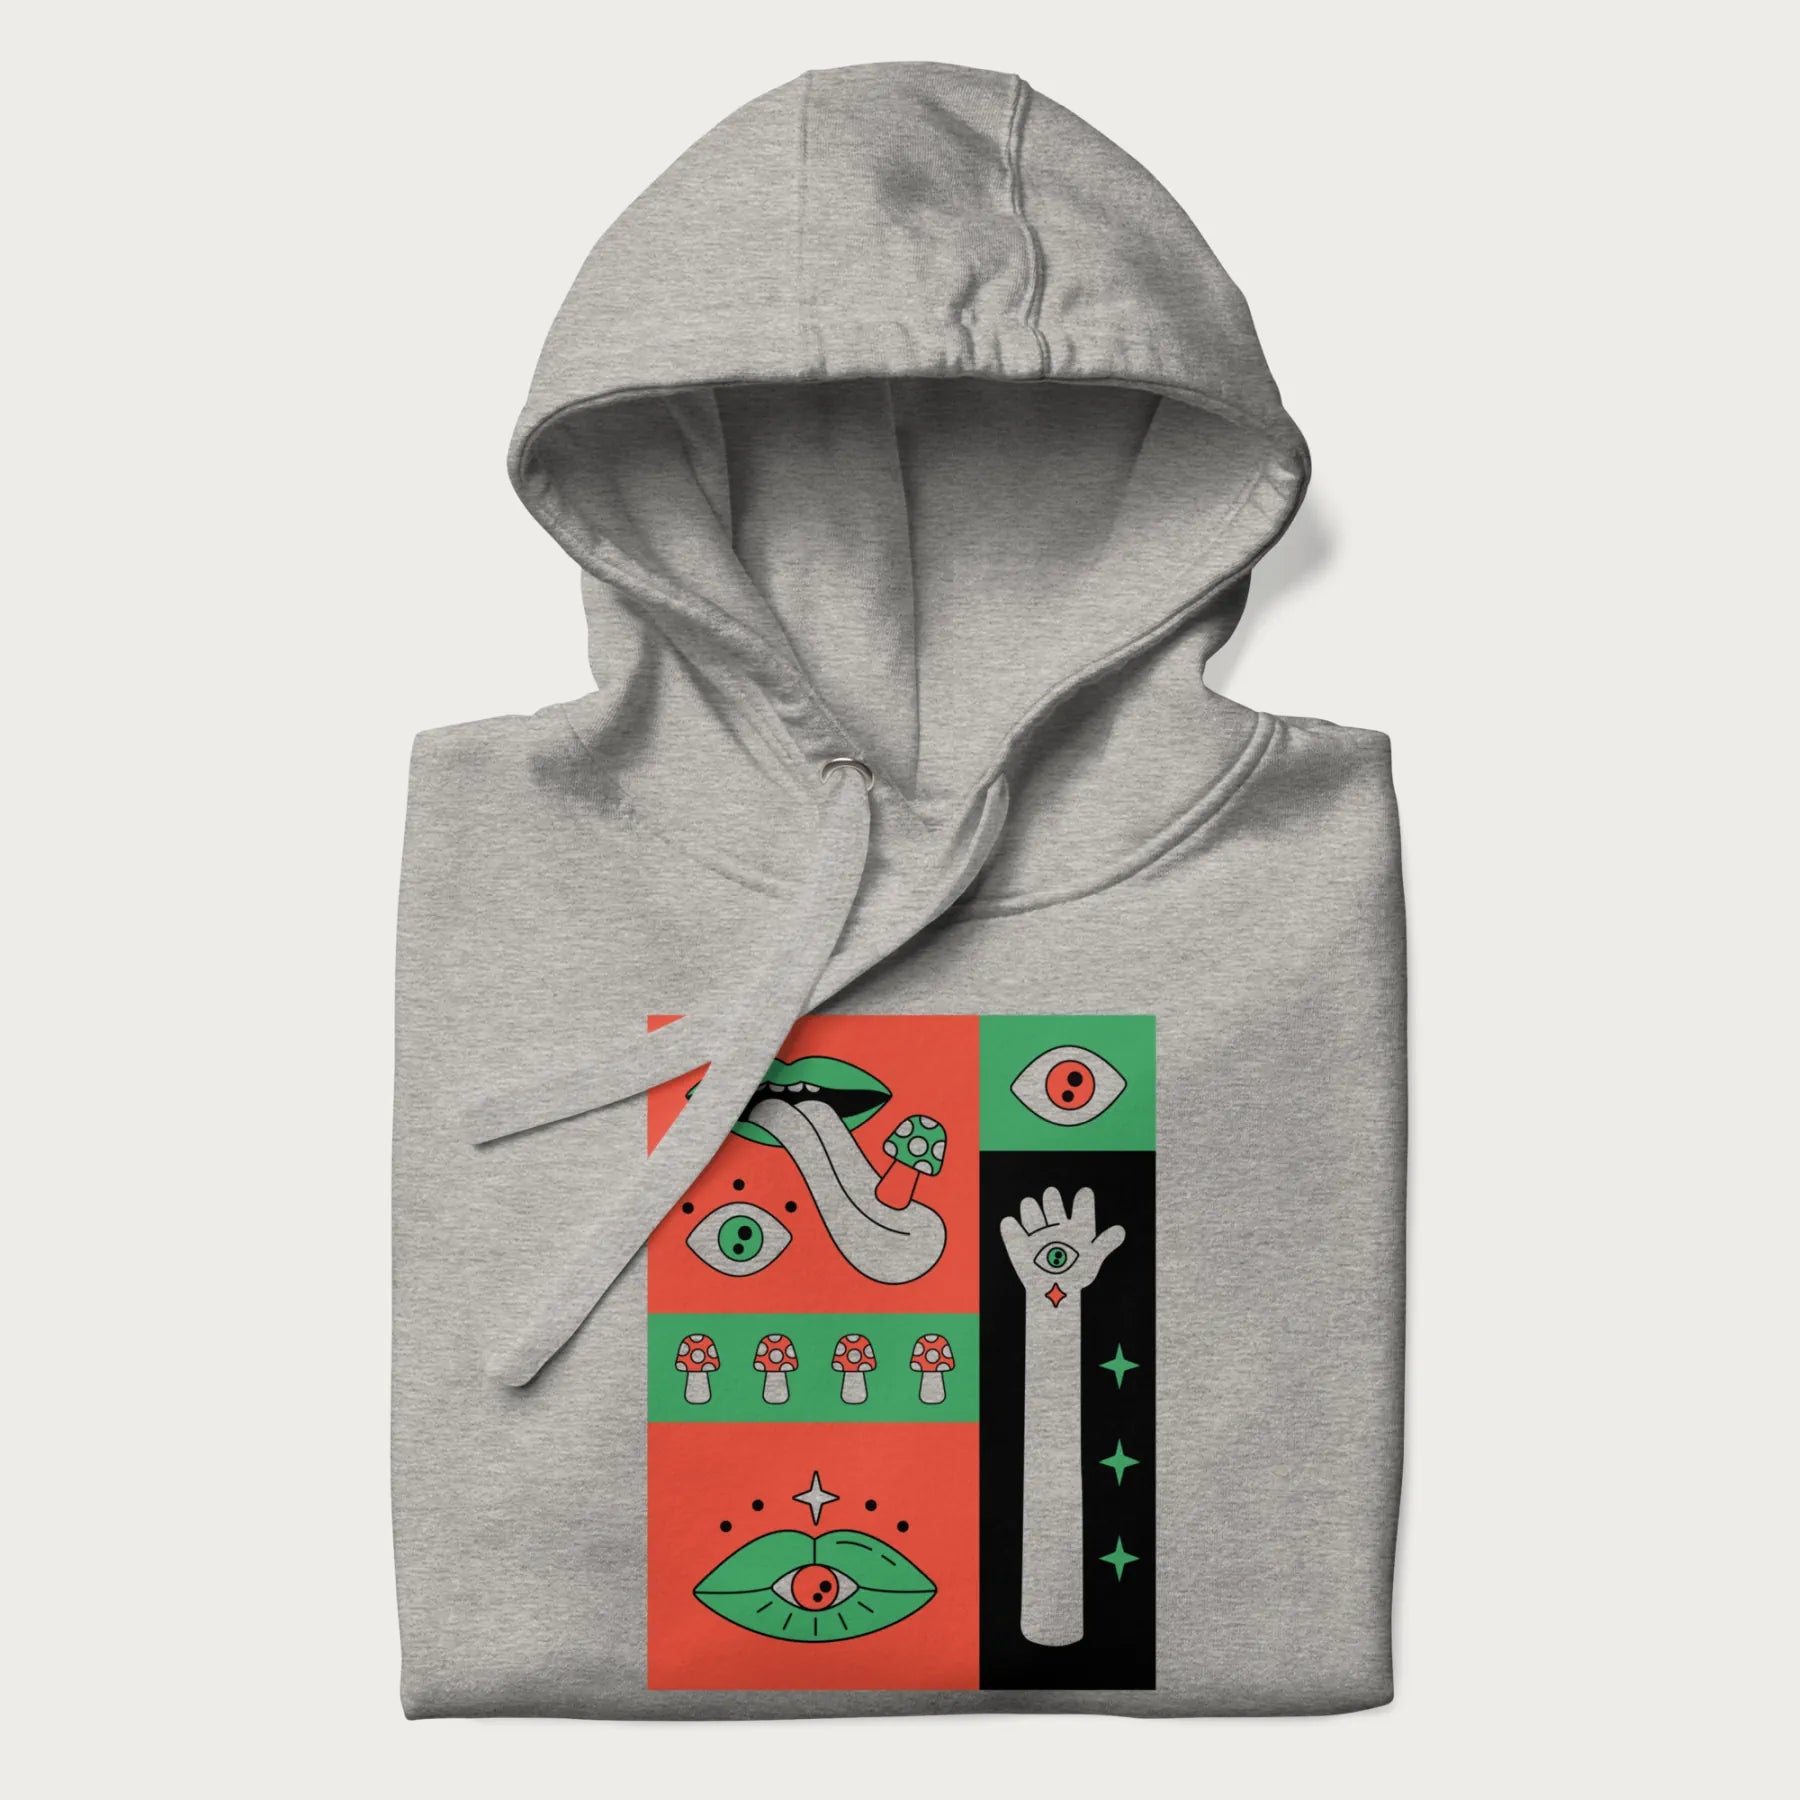 Folded light grey hoodie with mushroom psychedelic designs of surreal elements like lips, eyes, and mushrooms.